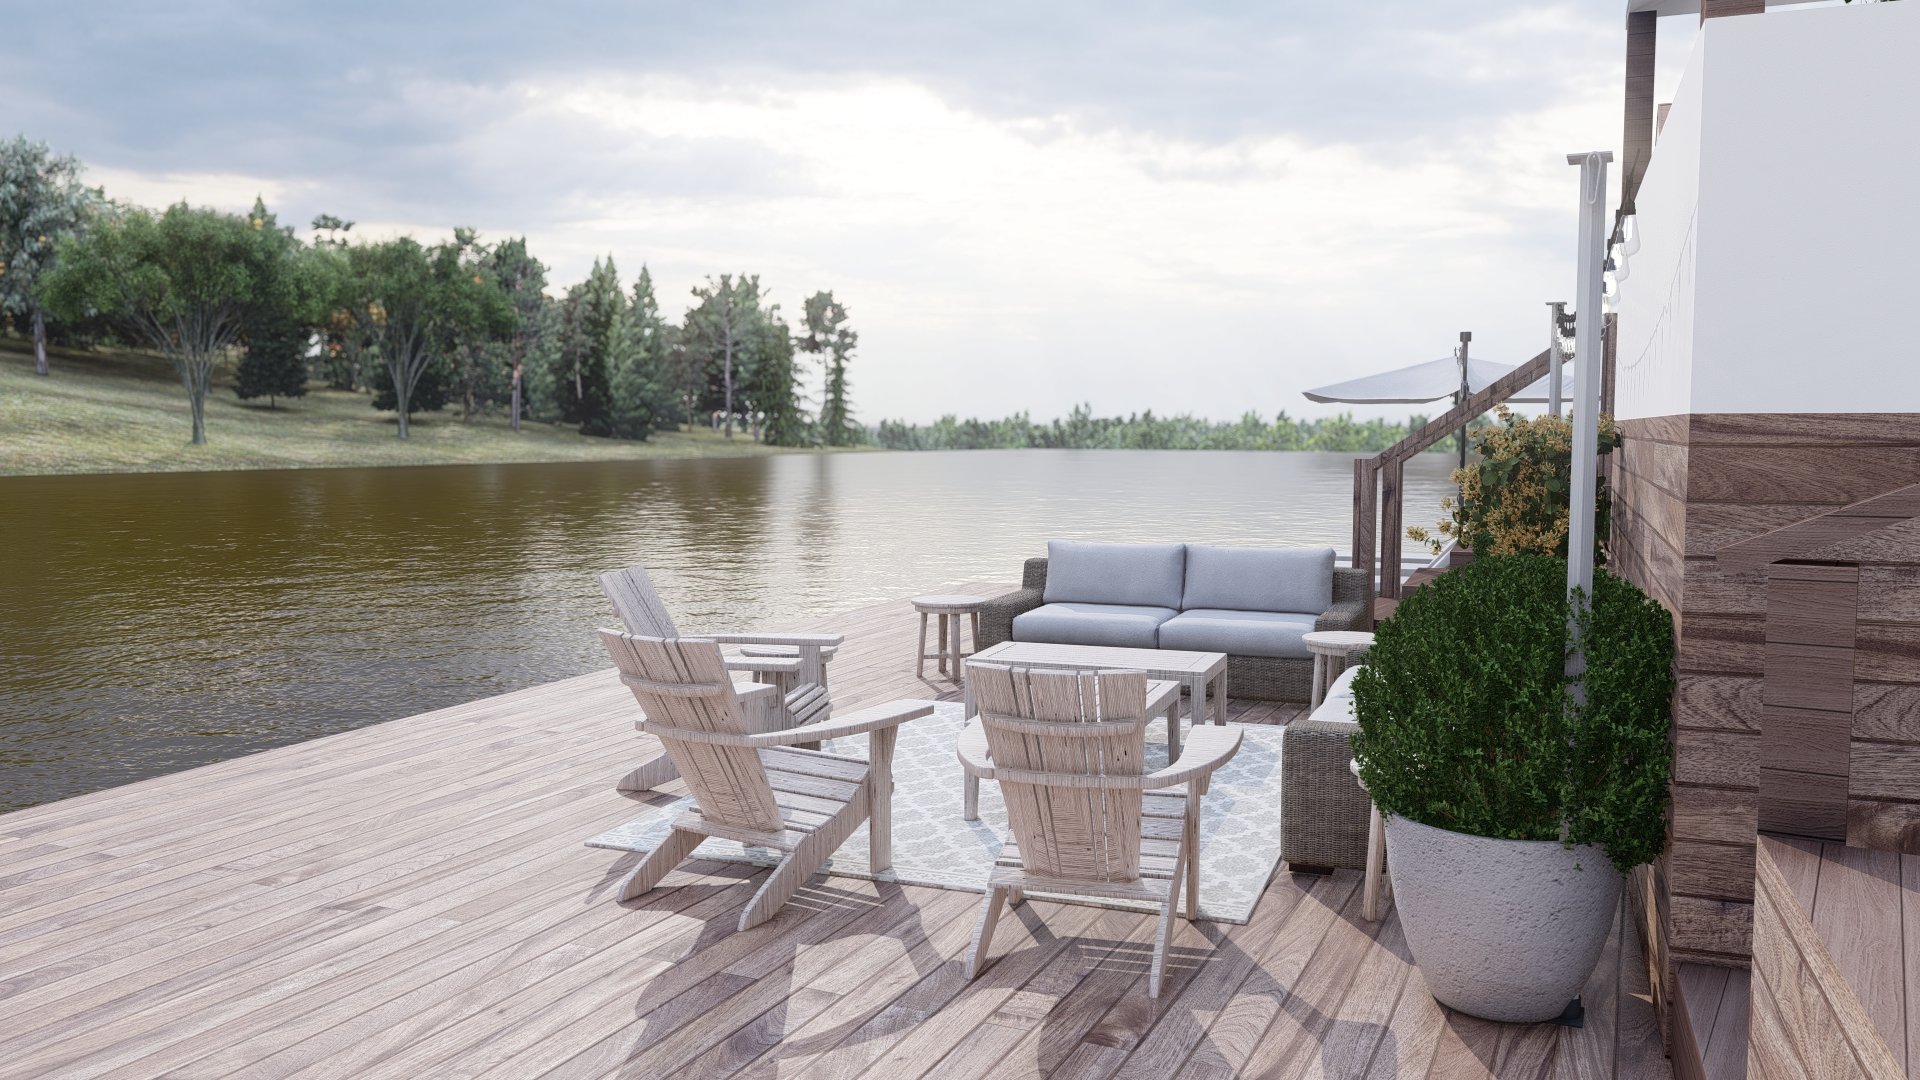 Weathered lakeside deck with teak adirondack chairs and Abaco sofa.